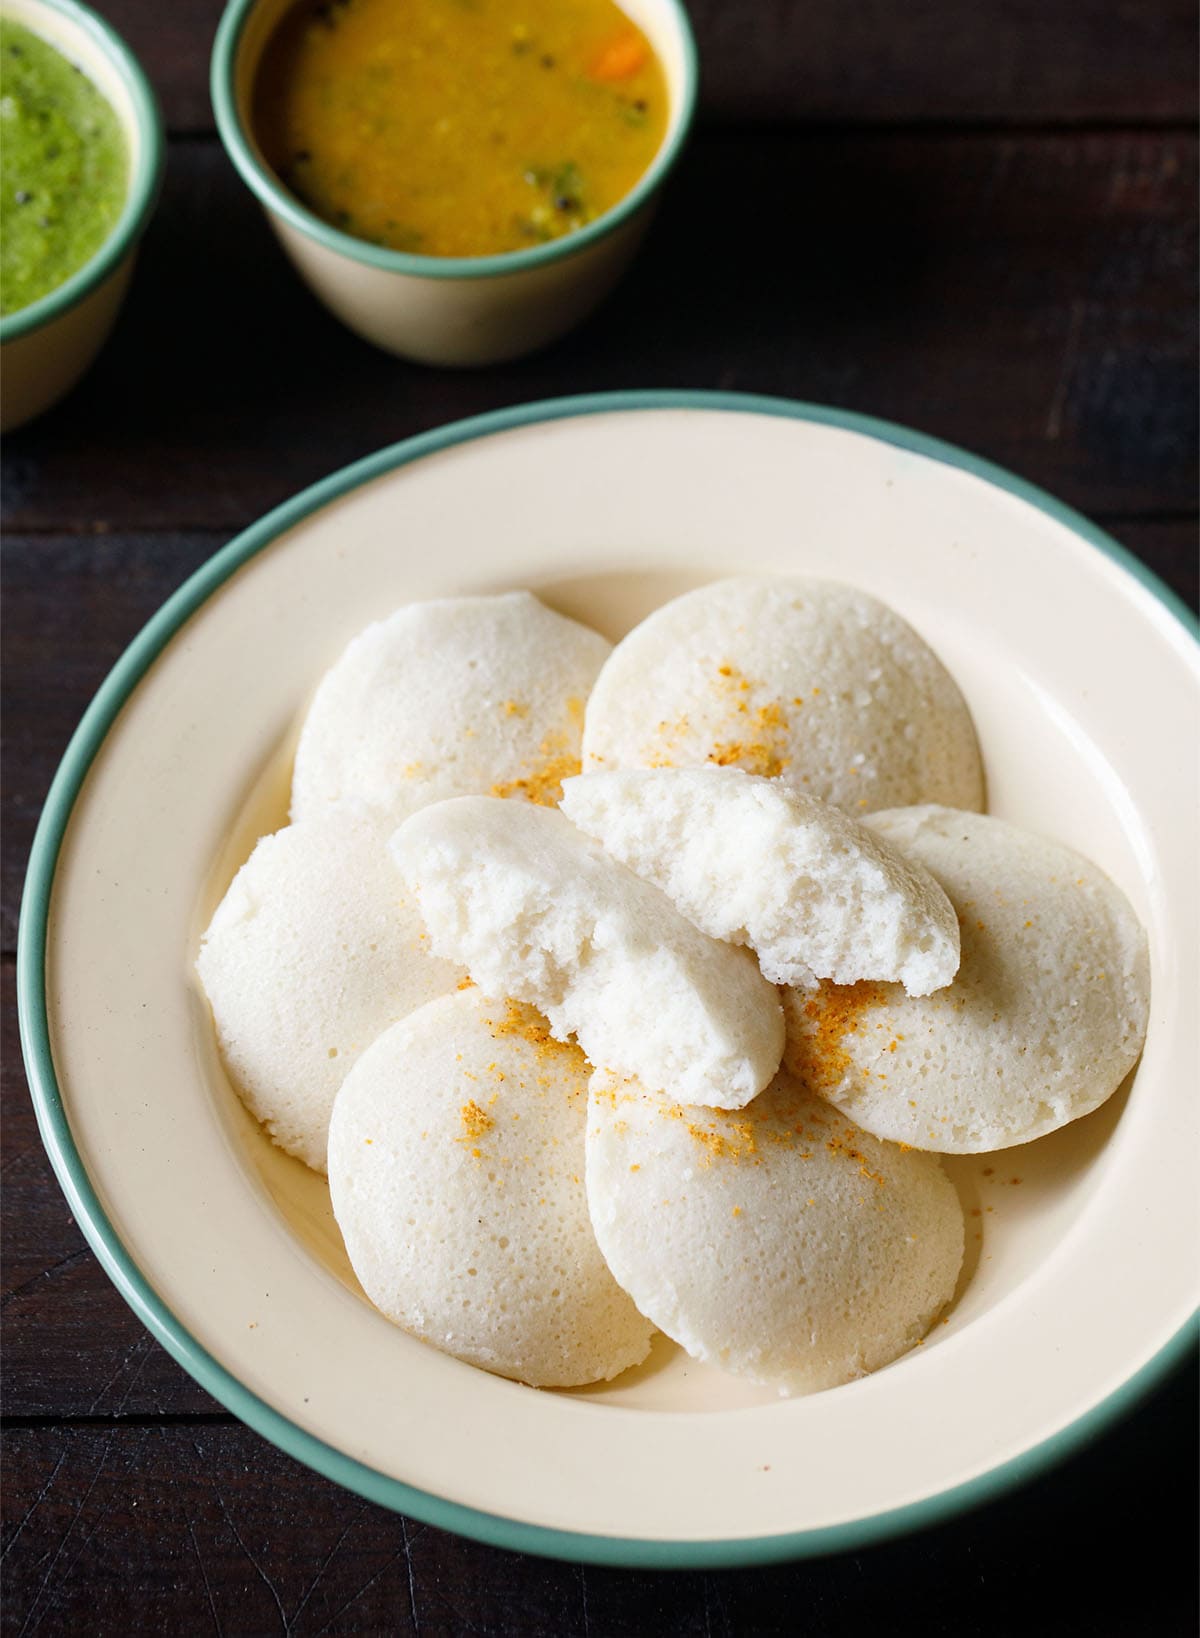 soft idli showing the fluffy texture served in a plate with sambar and chutney